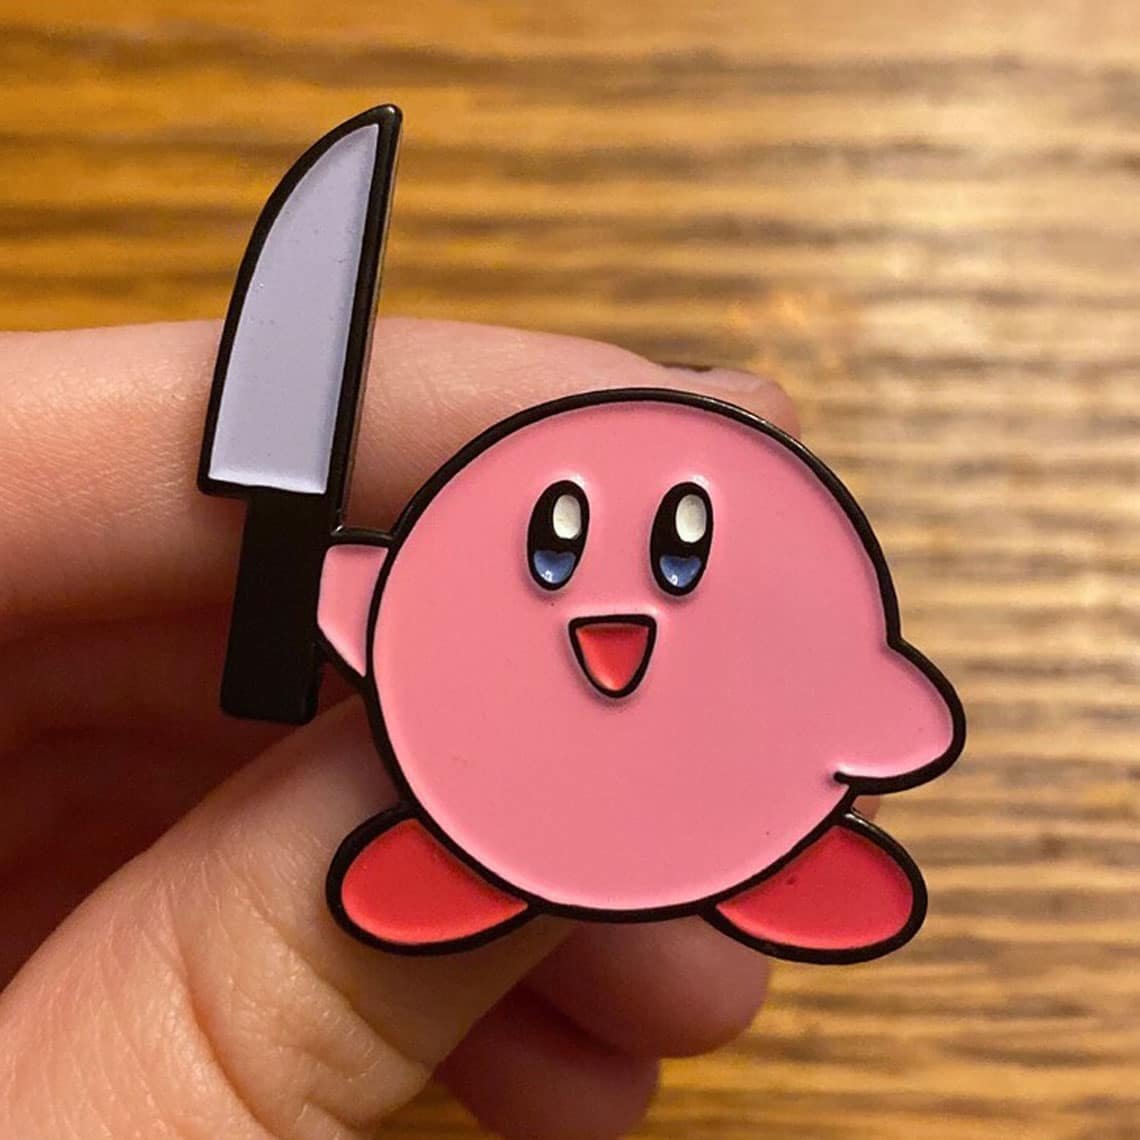 What happens if Kirby swallows a hot man?' and other Kirby Qs